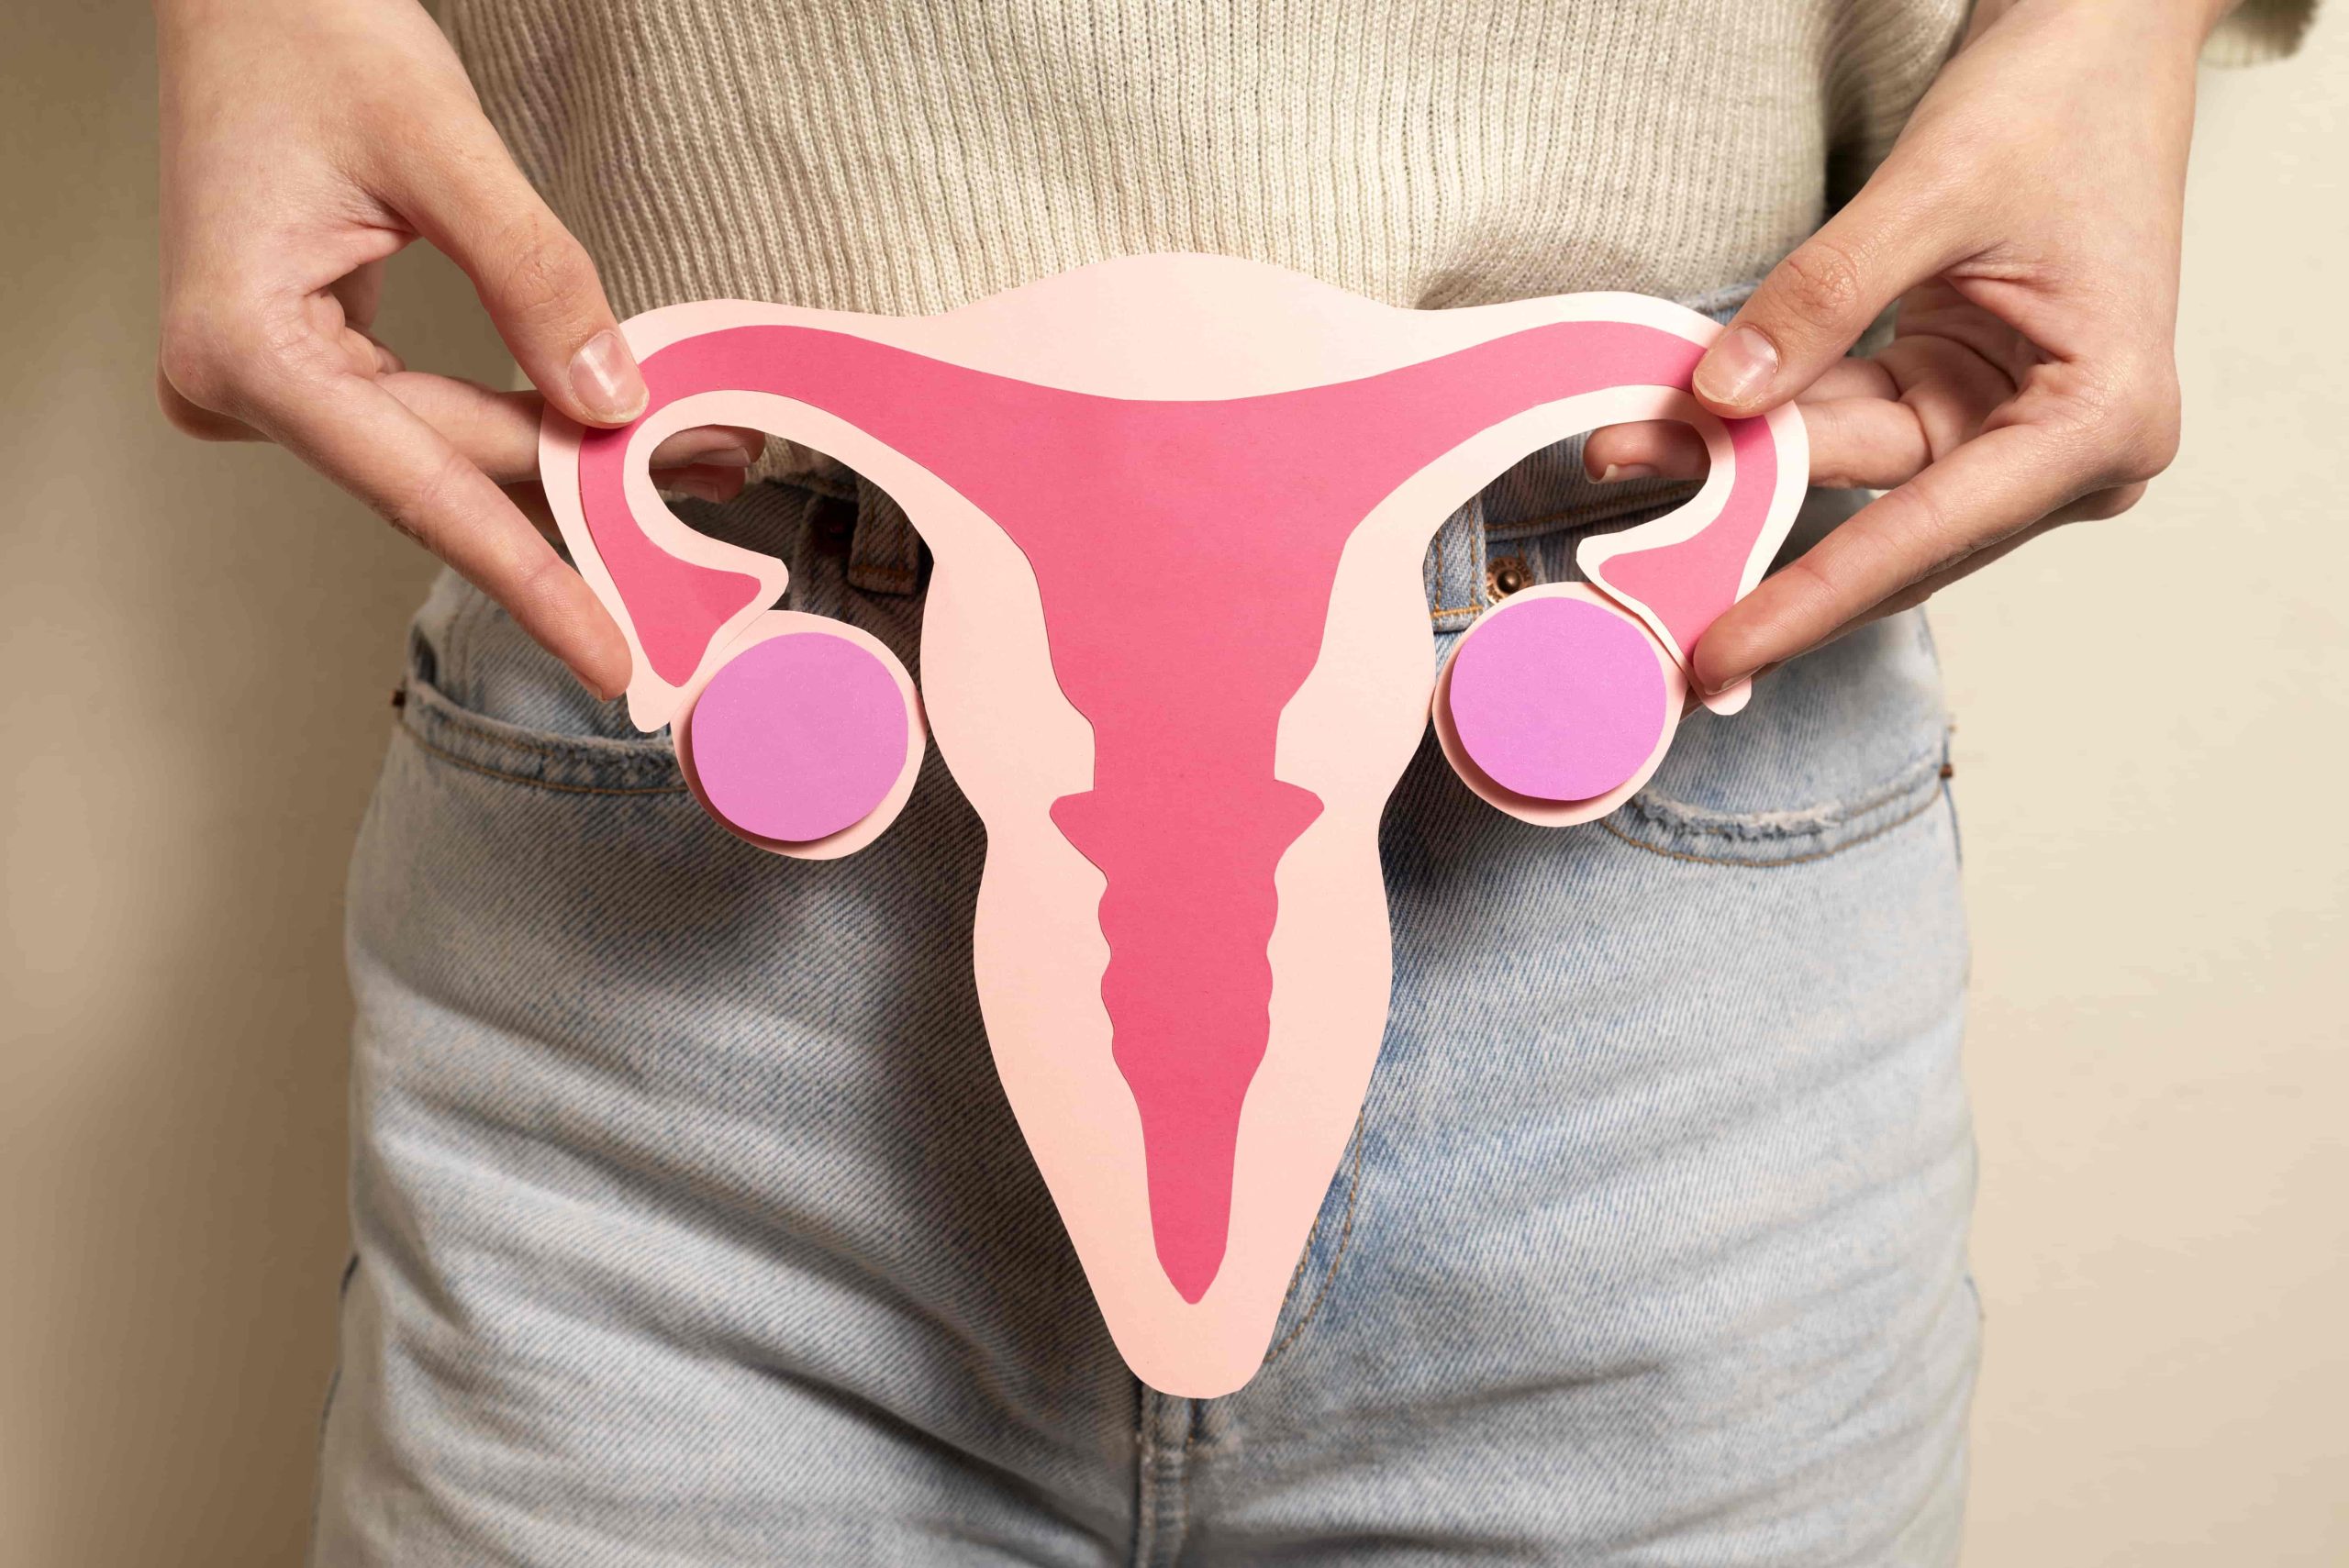 Tilted uterus: How it affects fertility and sex